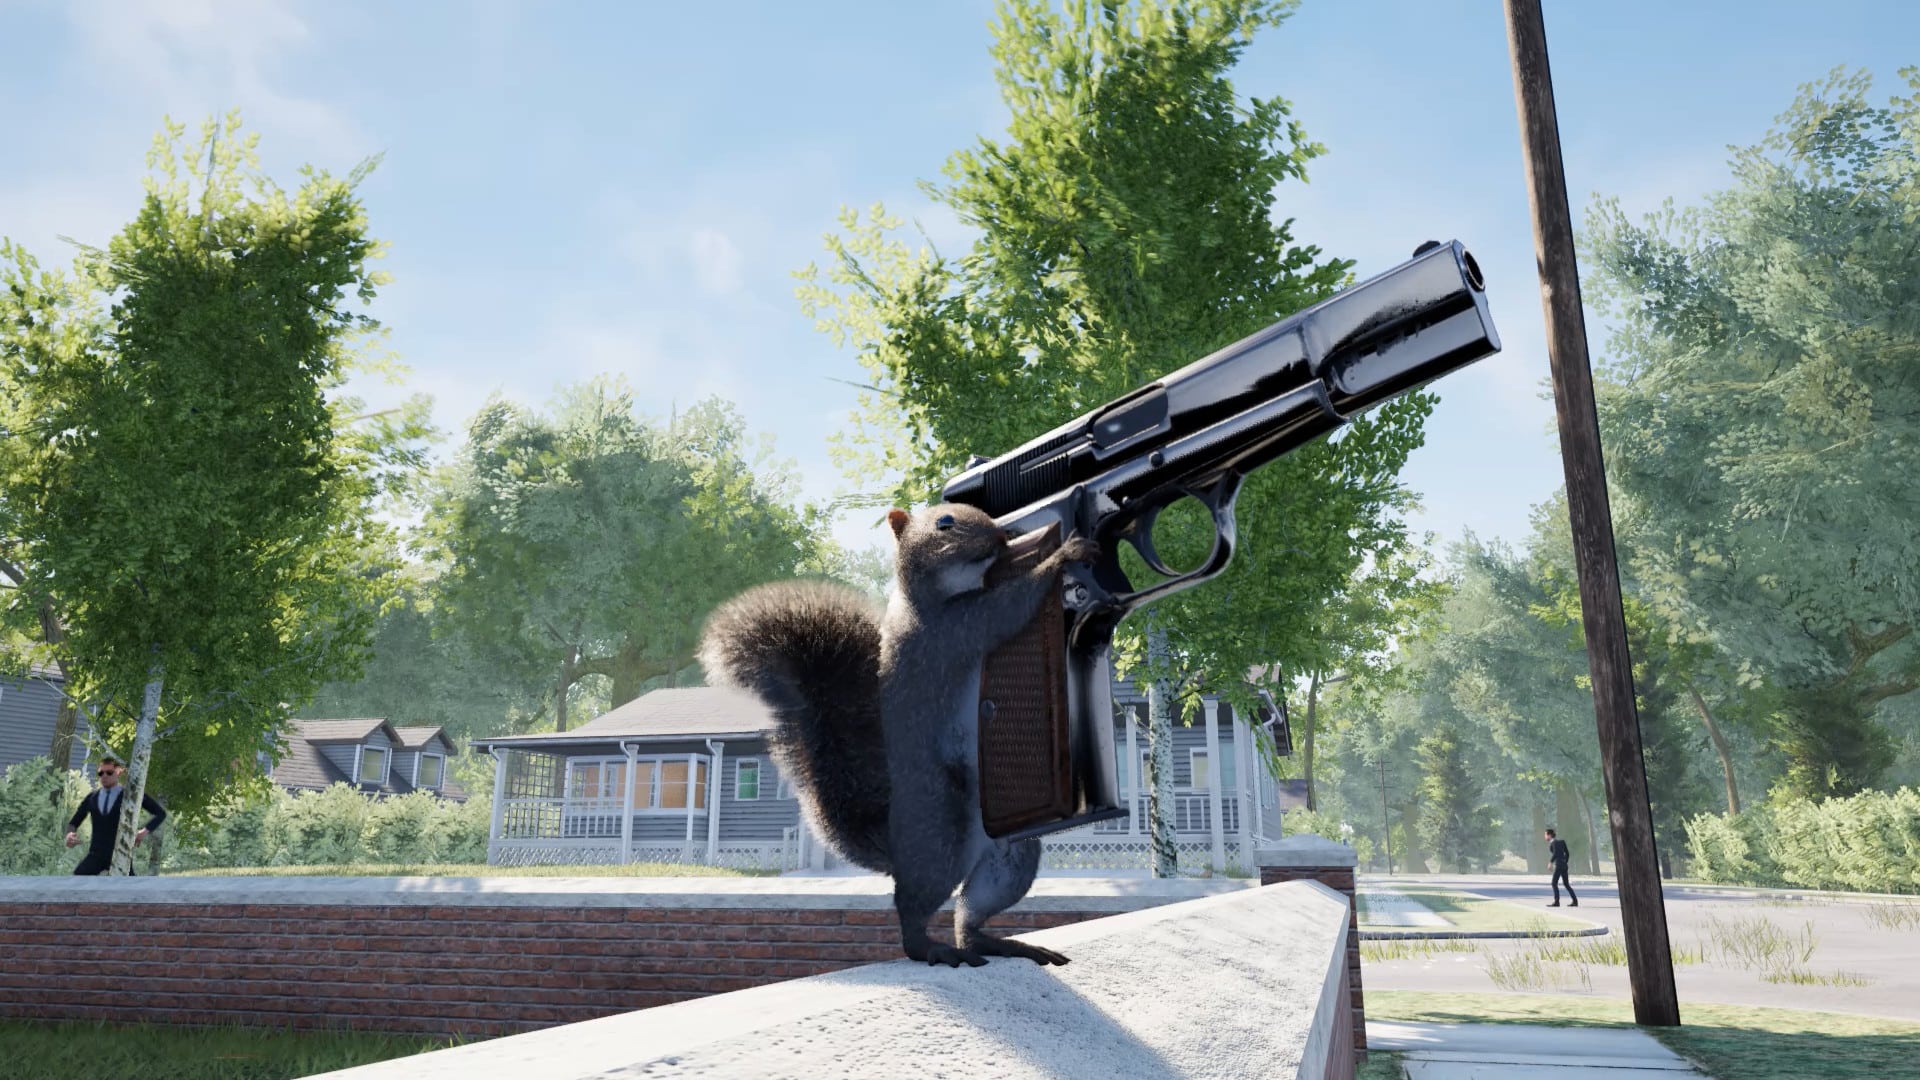 In this crazy game you are an armed squirrel